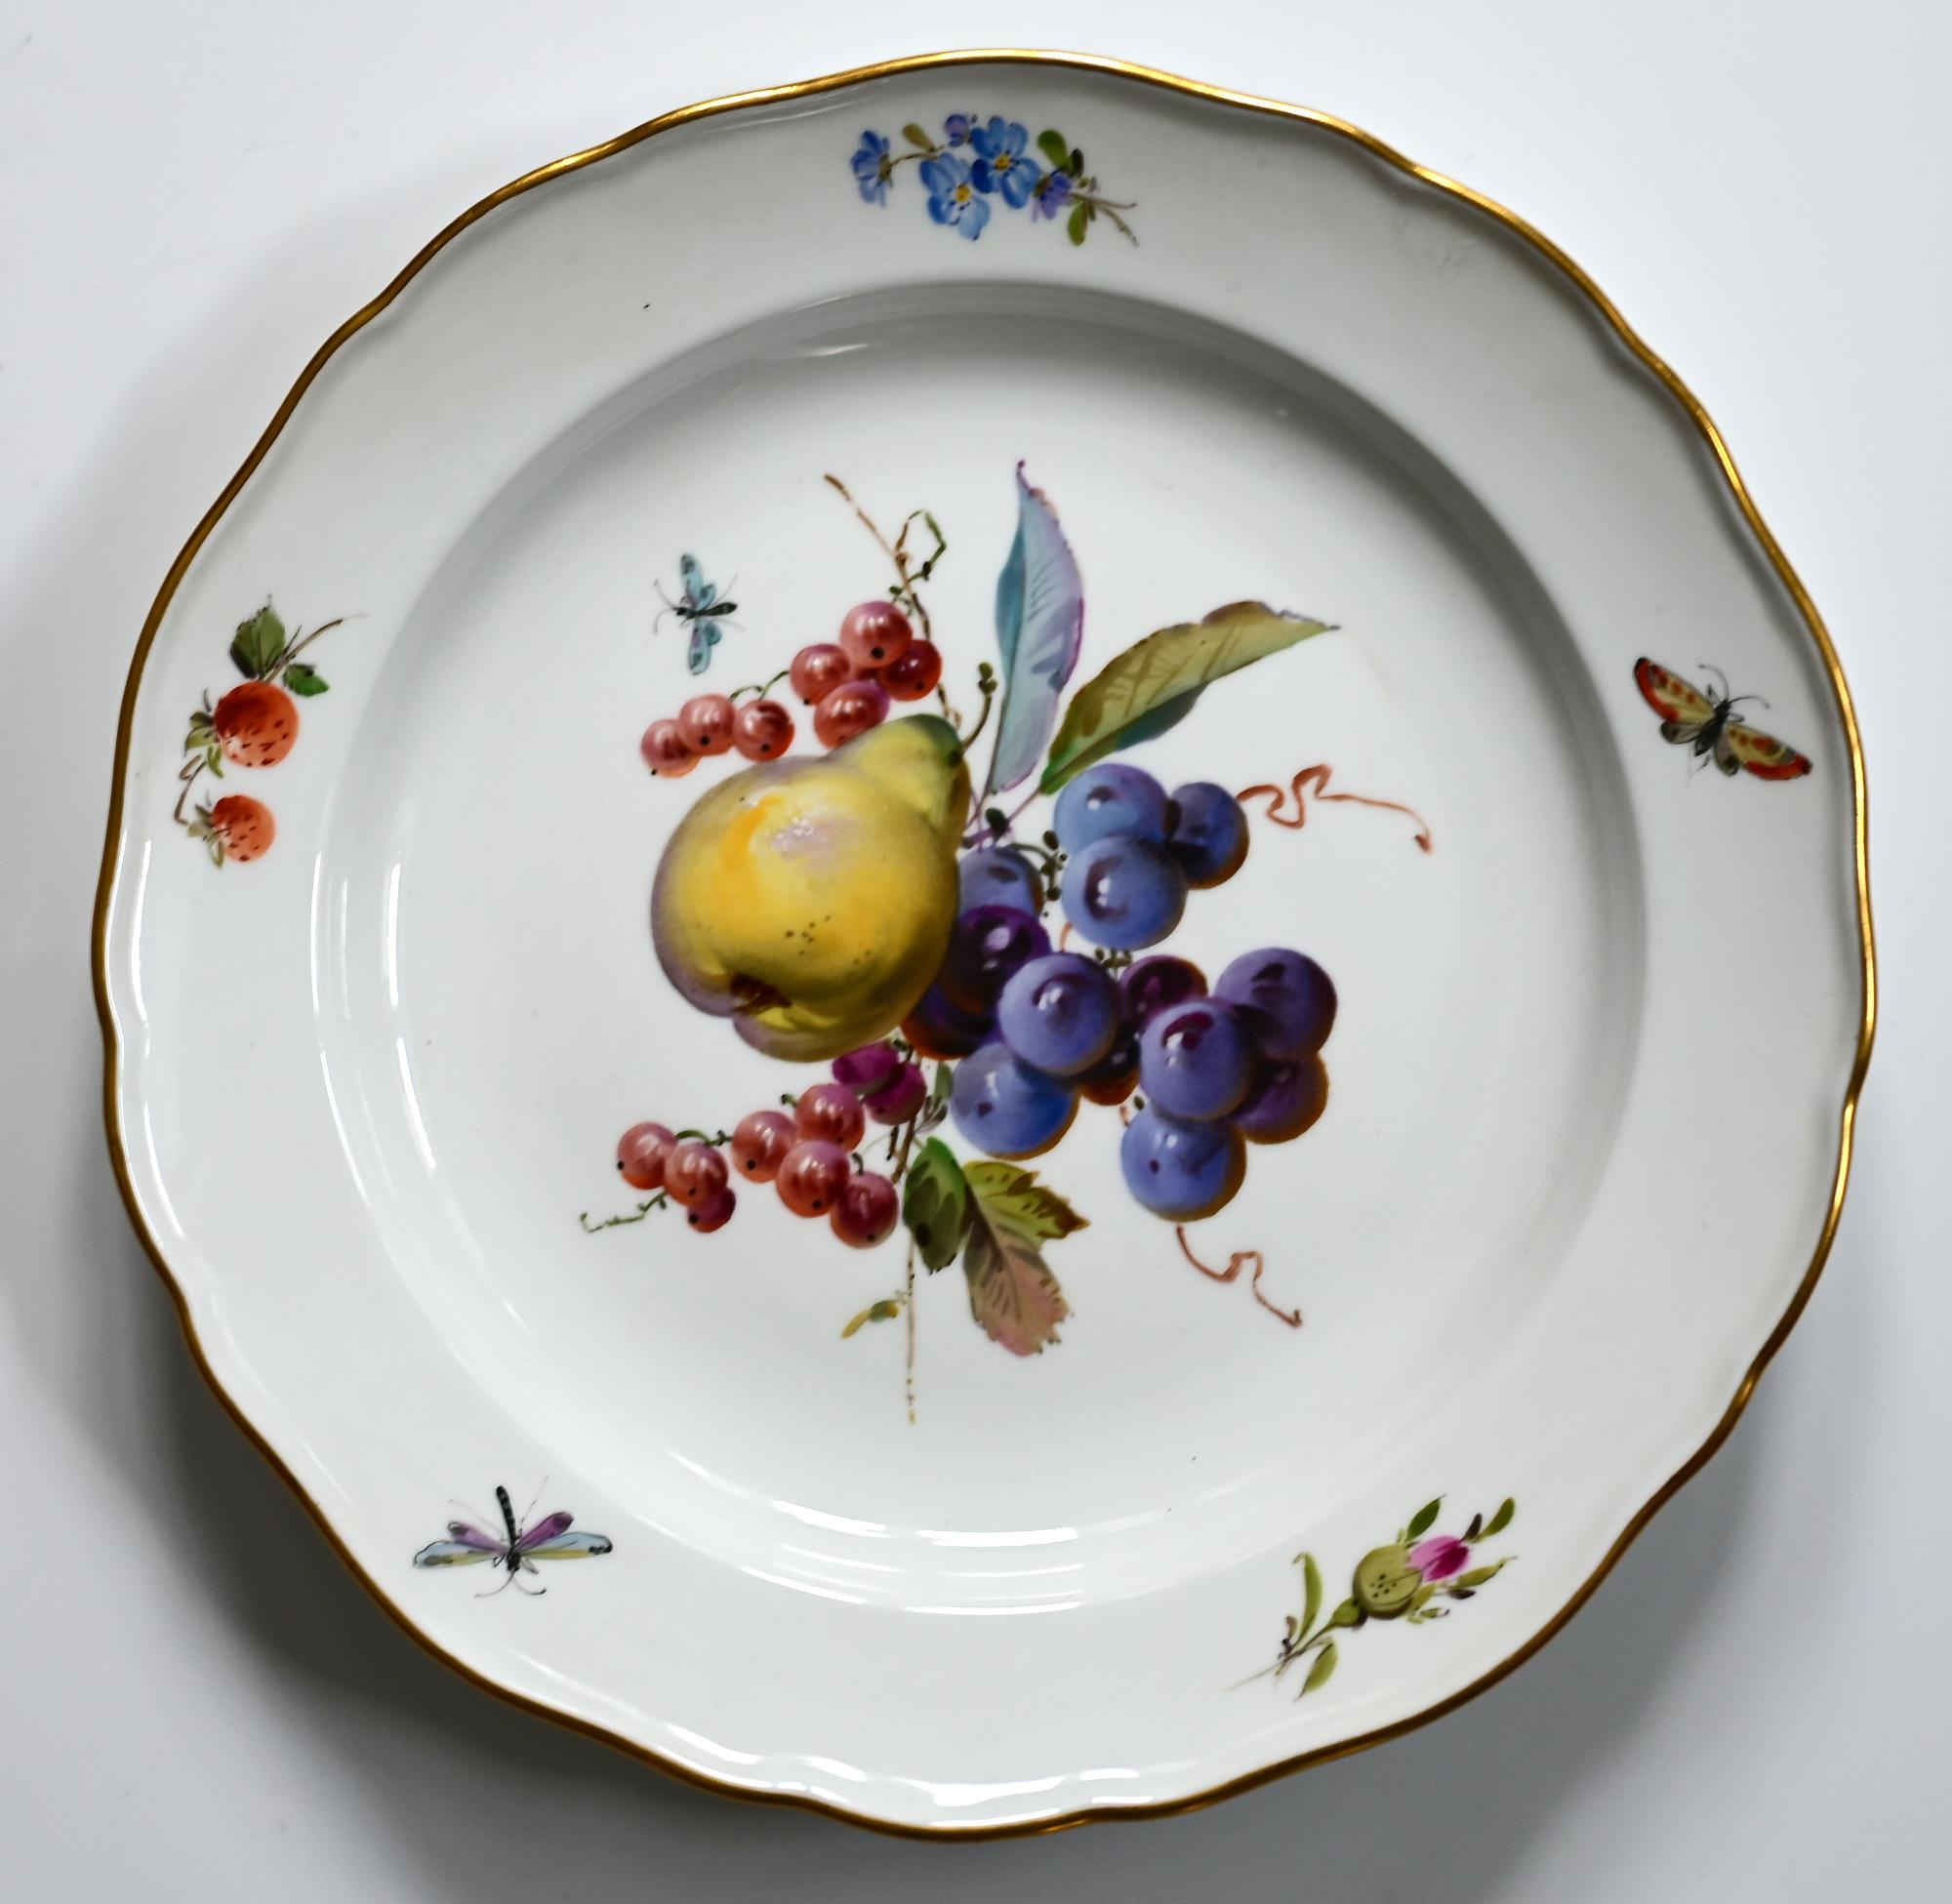 German Set of 12 Meissen Plates with Fruits, Insects and Flowers 19.Jhdt Porcelain